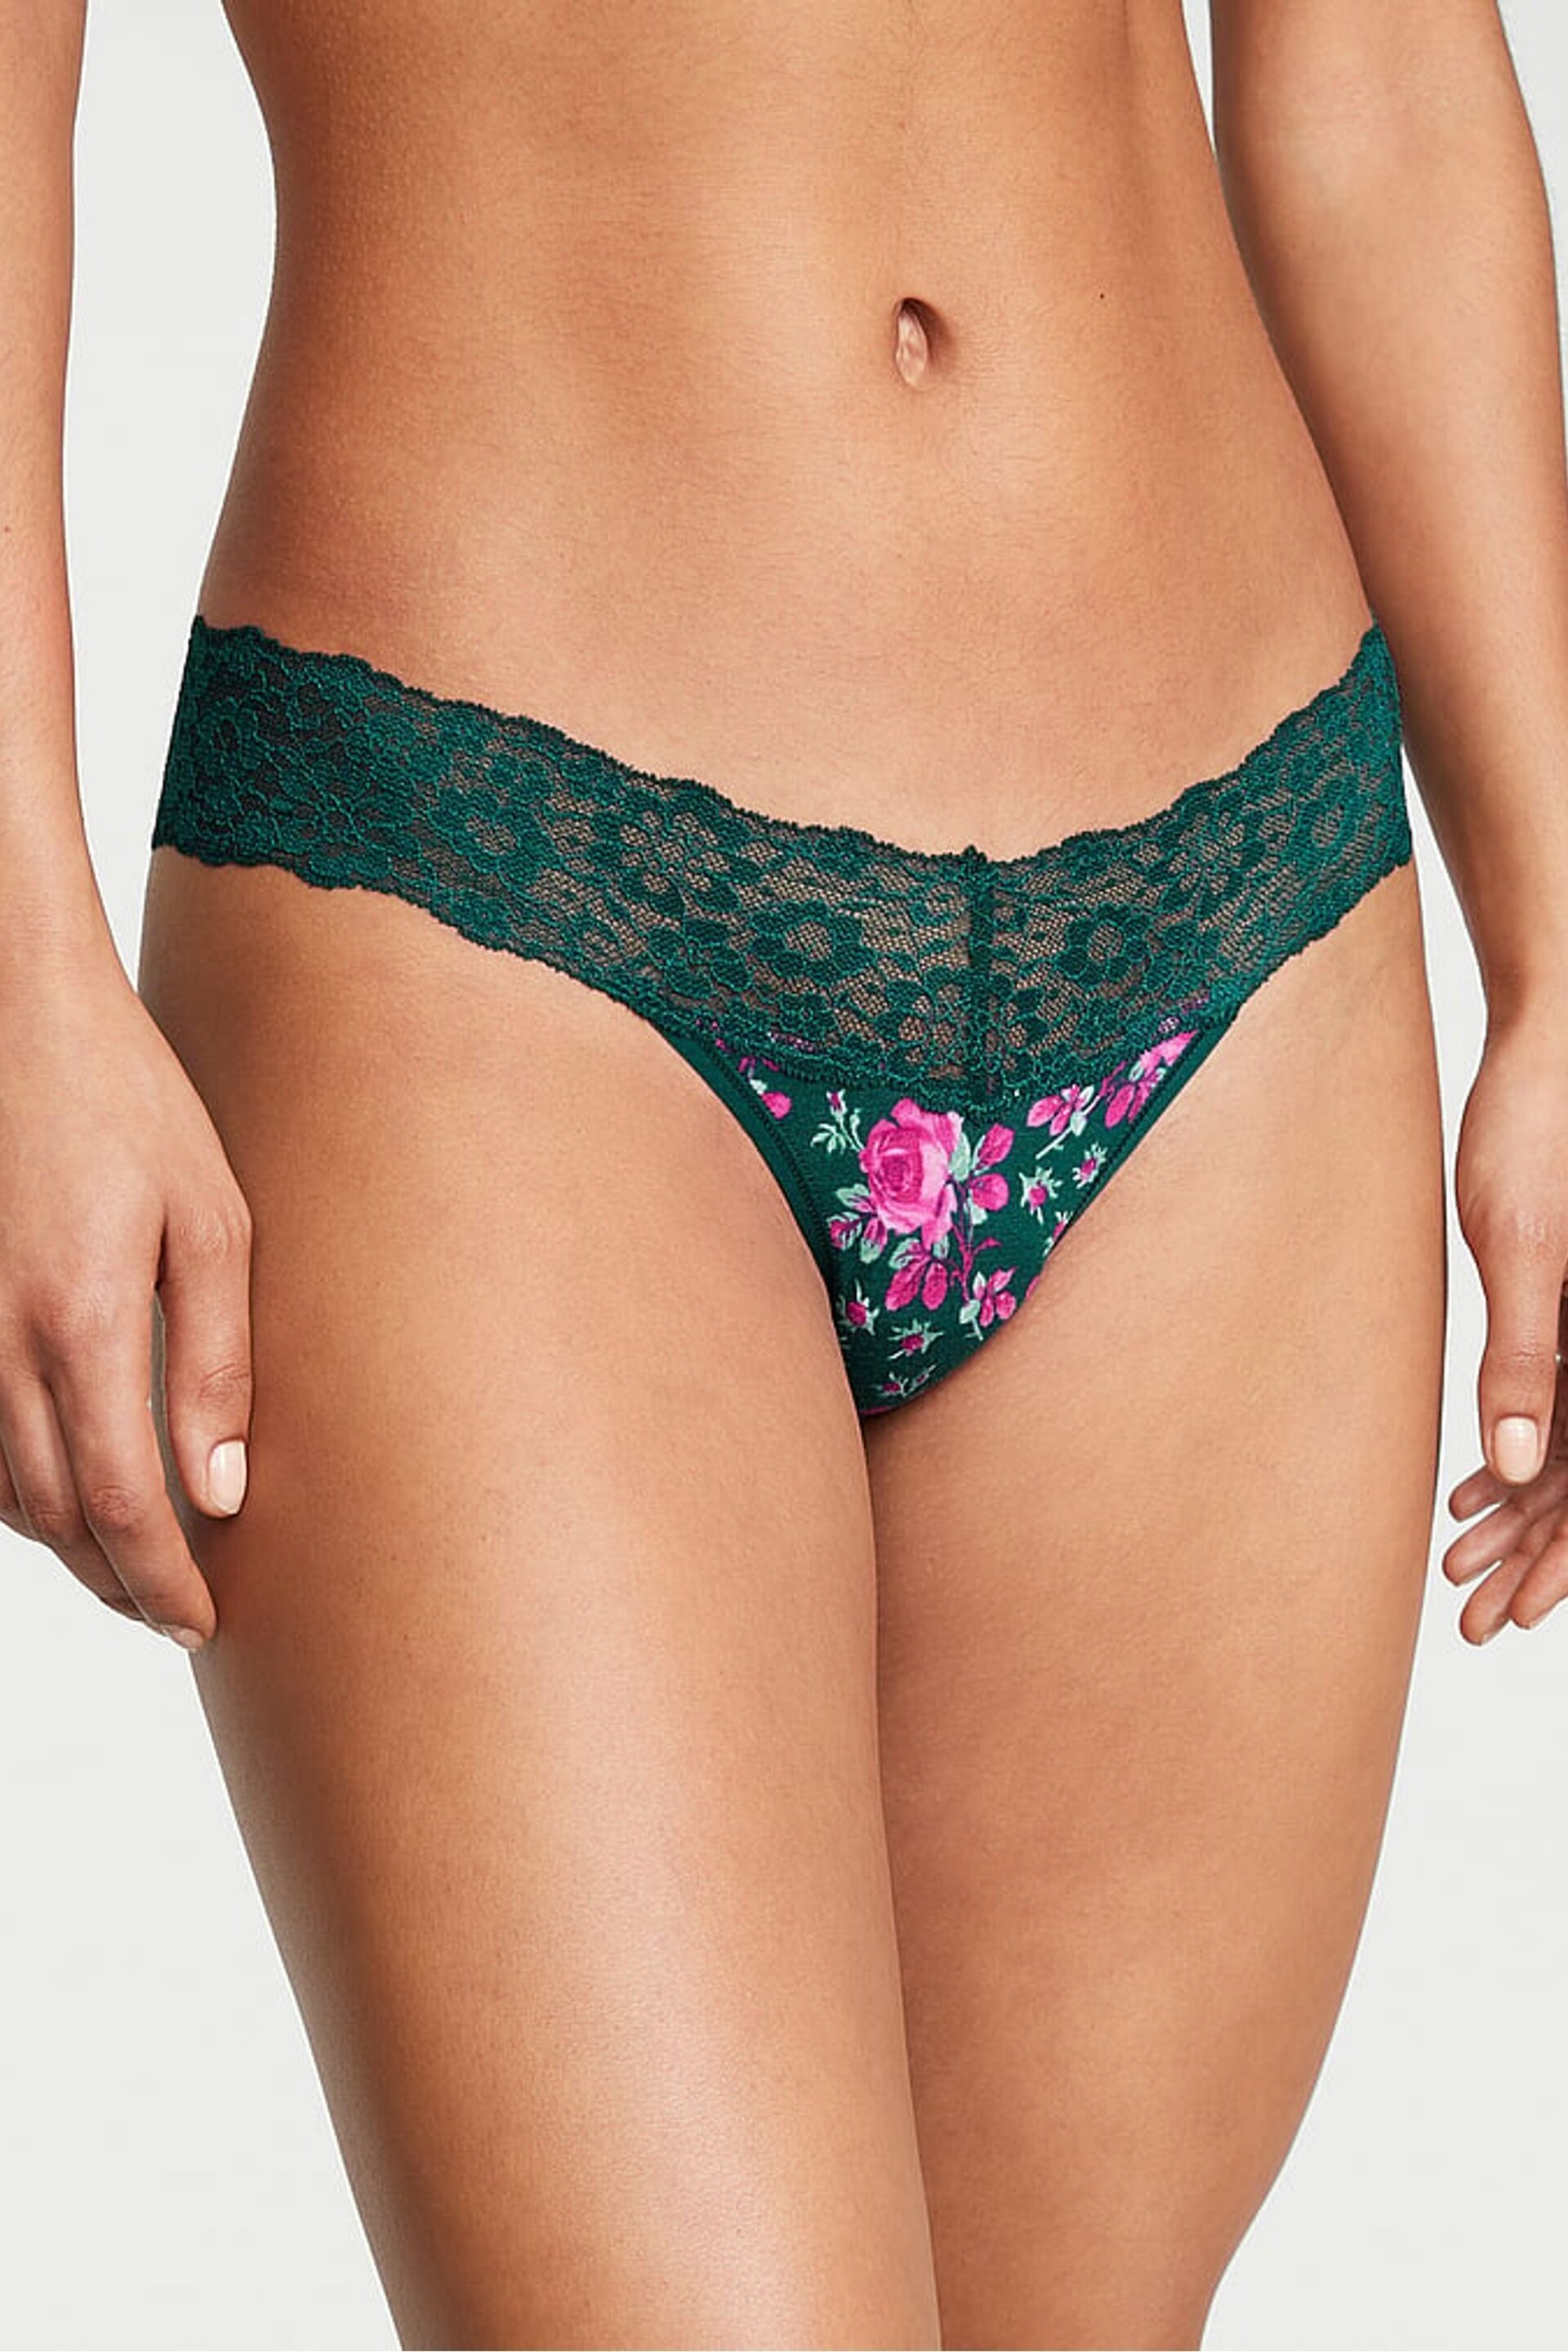 Victoria's Secret Black Ivy Green Moody Roses Posey Lace Waist Thong Knickers - Image 1 of 3